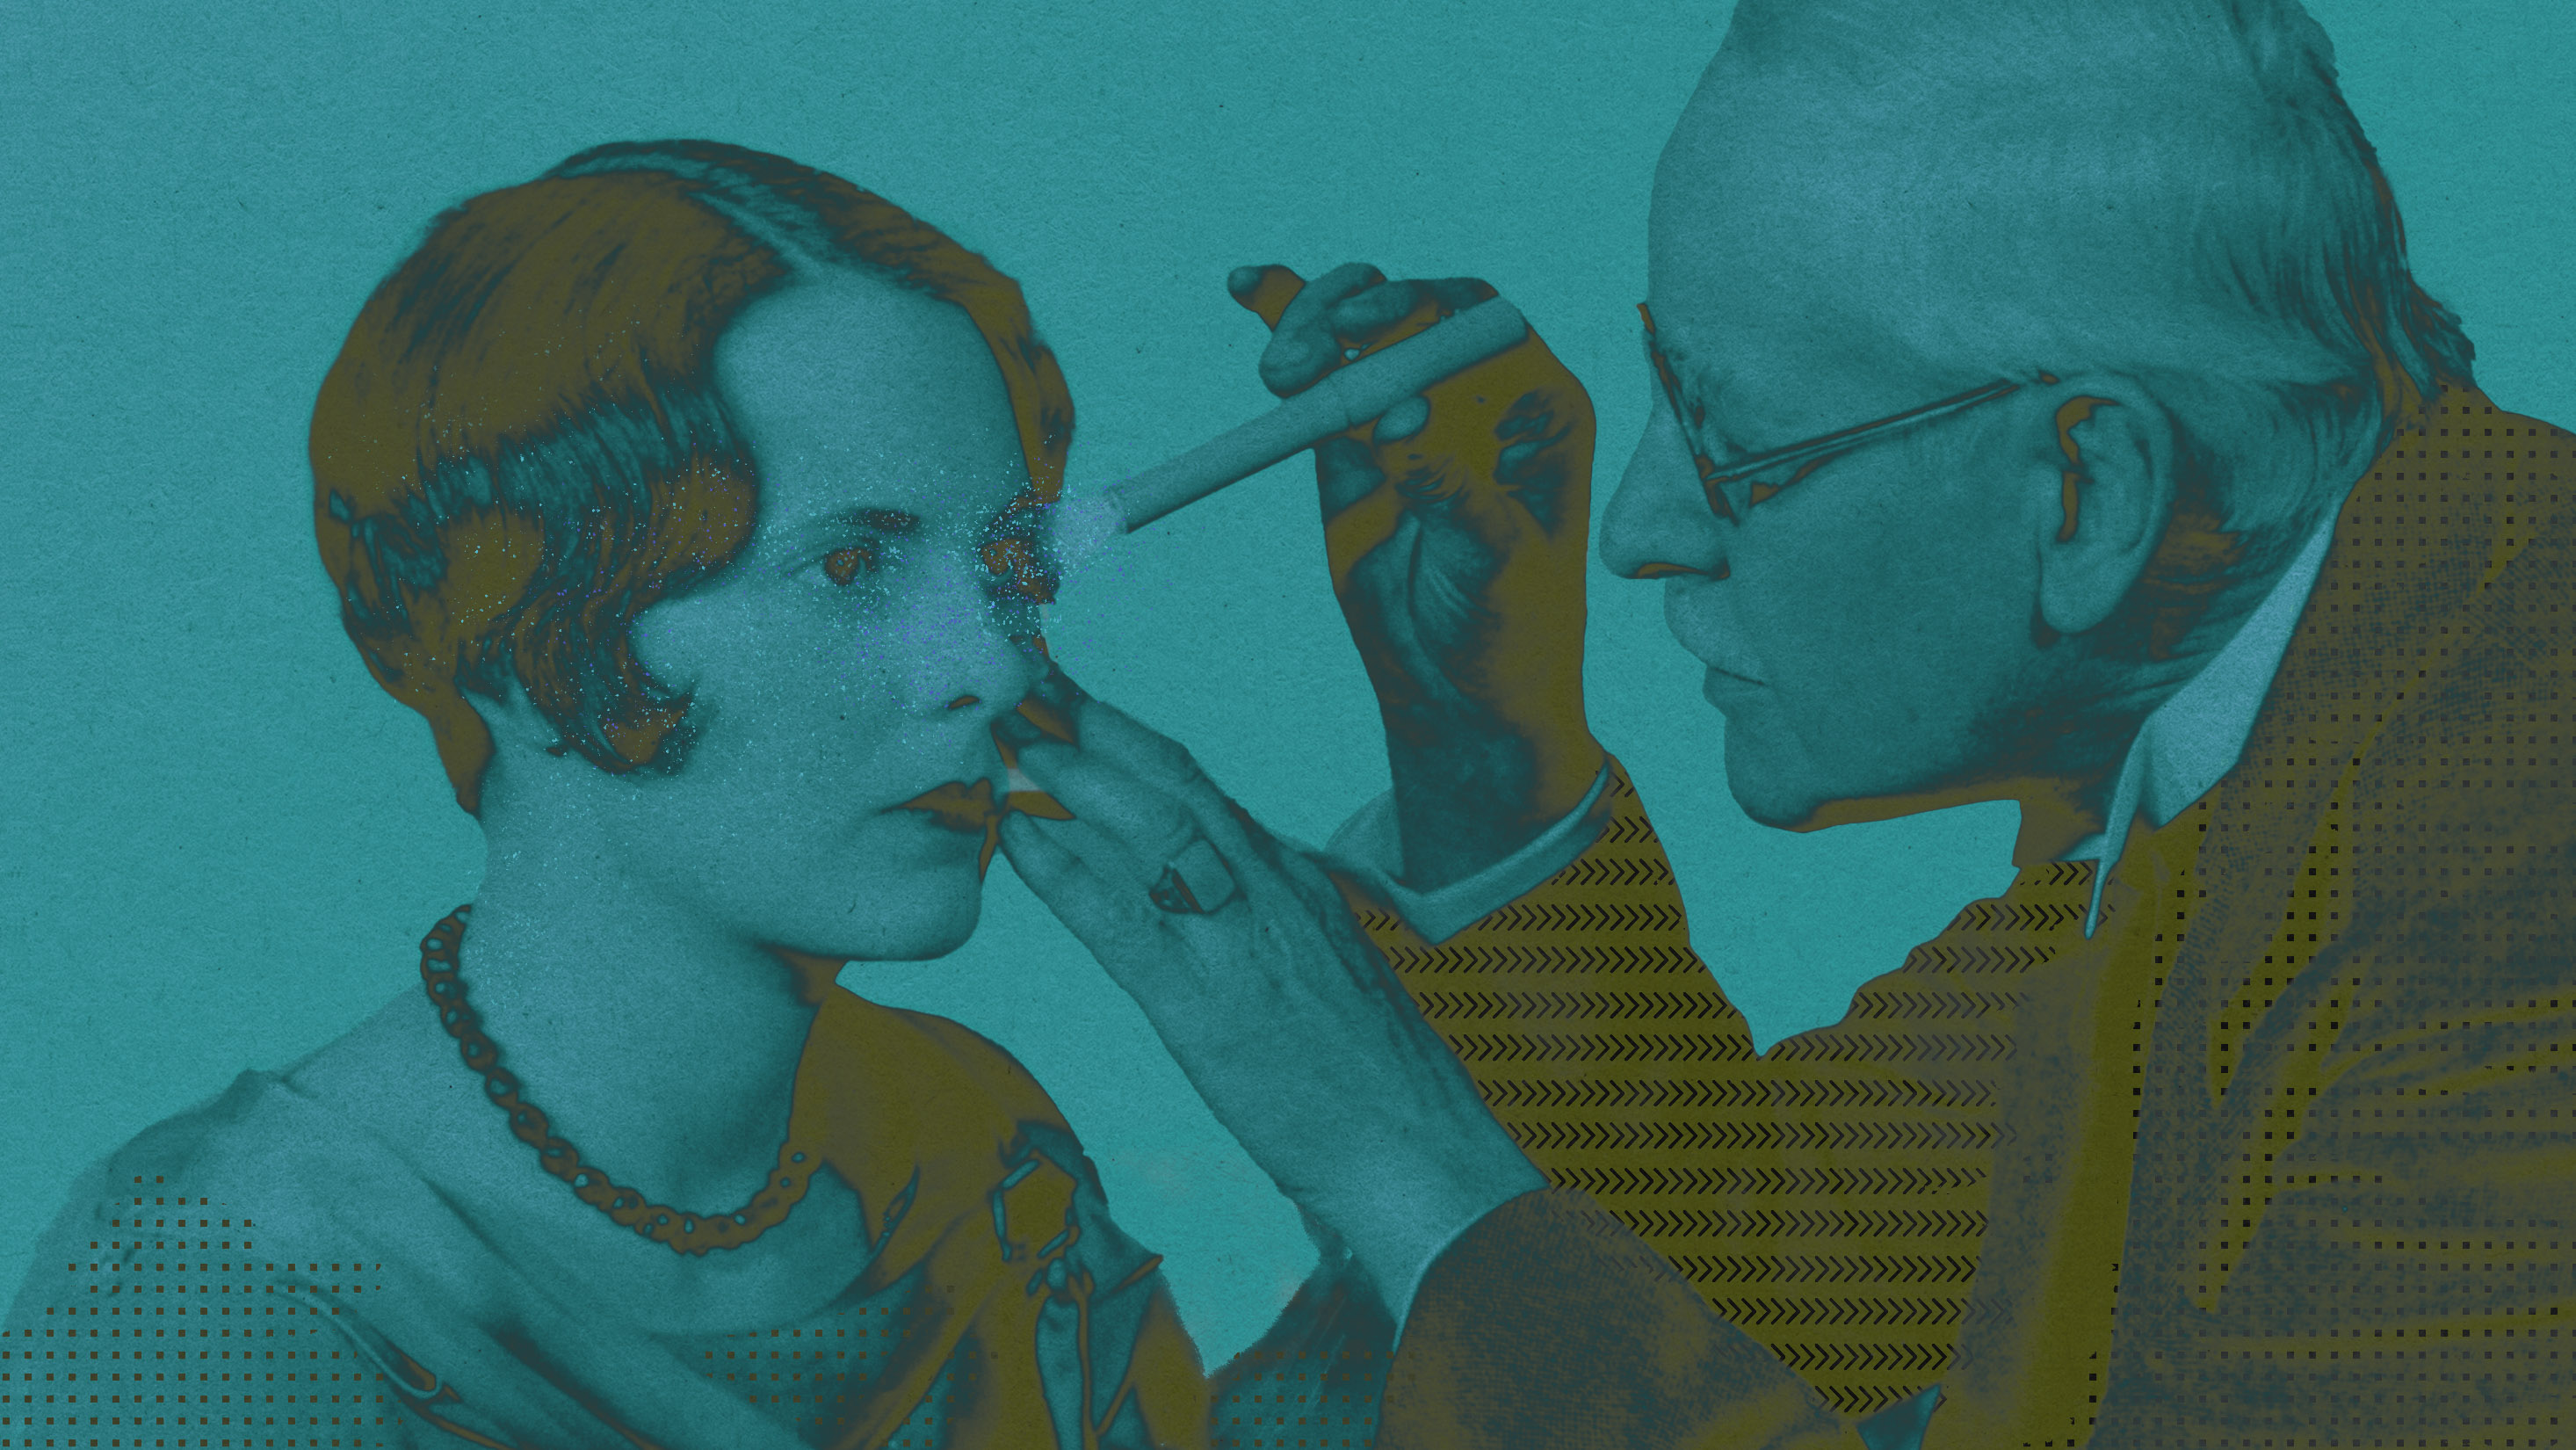 older male doctor shines a light in a female patients eye, circa 1920s with digital patterns overlaid on image